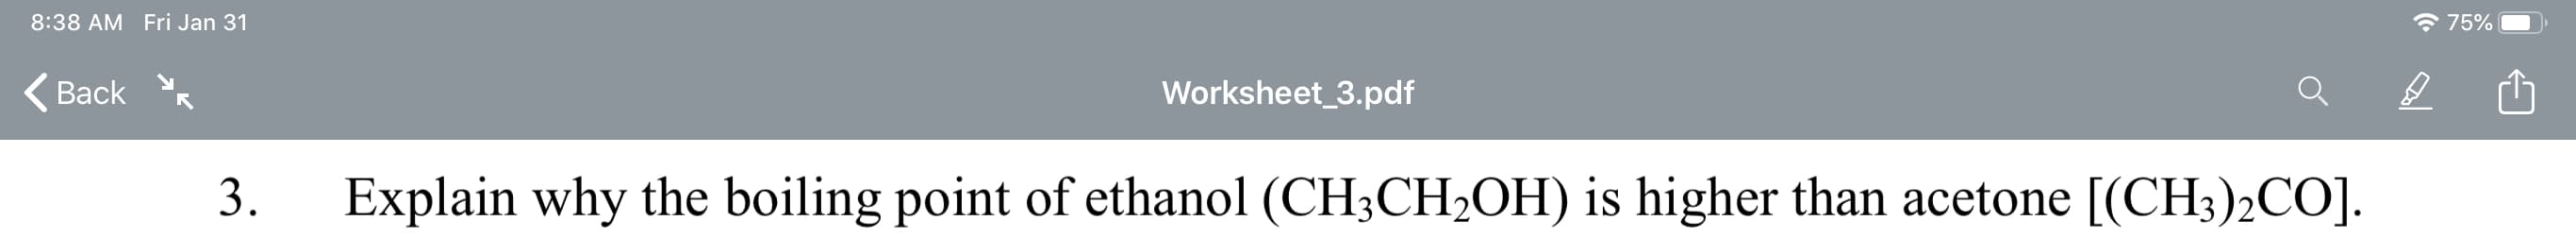 8:38 AM Fri Jan 31
75%
(Back
Worksheet_3.pdf
Explain why the boiling point of ethanol (CH3CH2OH) is higher than acetone [(CH3)2CO].
3.
